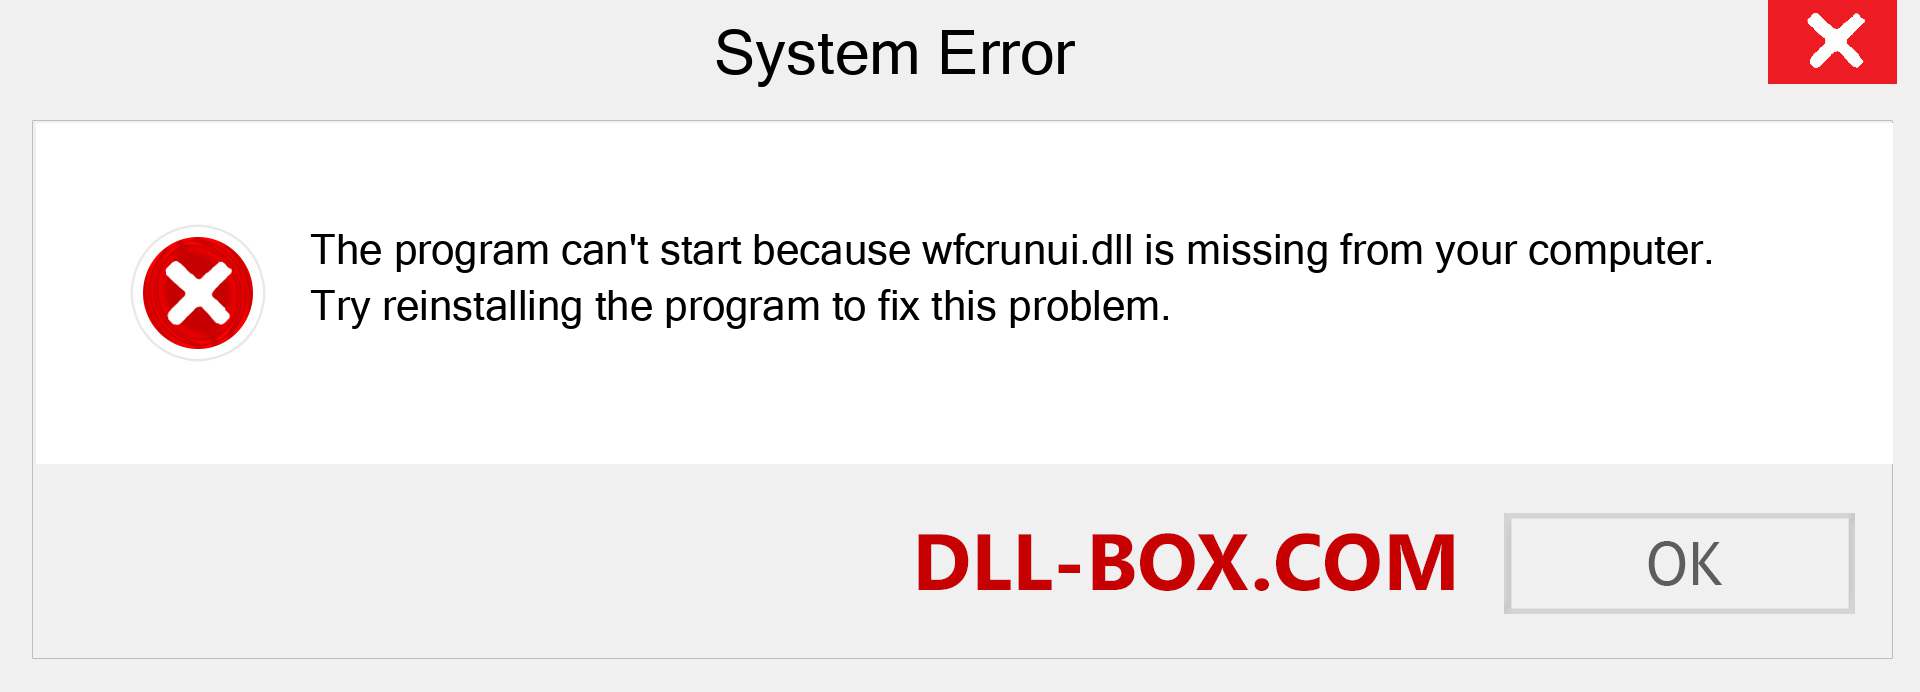  wfcrunui.dll file is missing?. Download for Windows 7, 8, 10 - Fix  wfcrunui dll Missing Error on Windows, photos, images